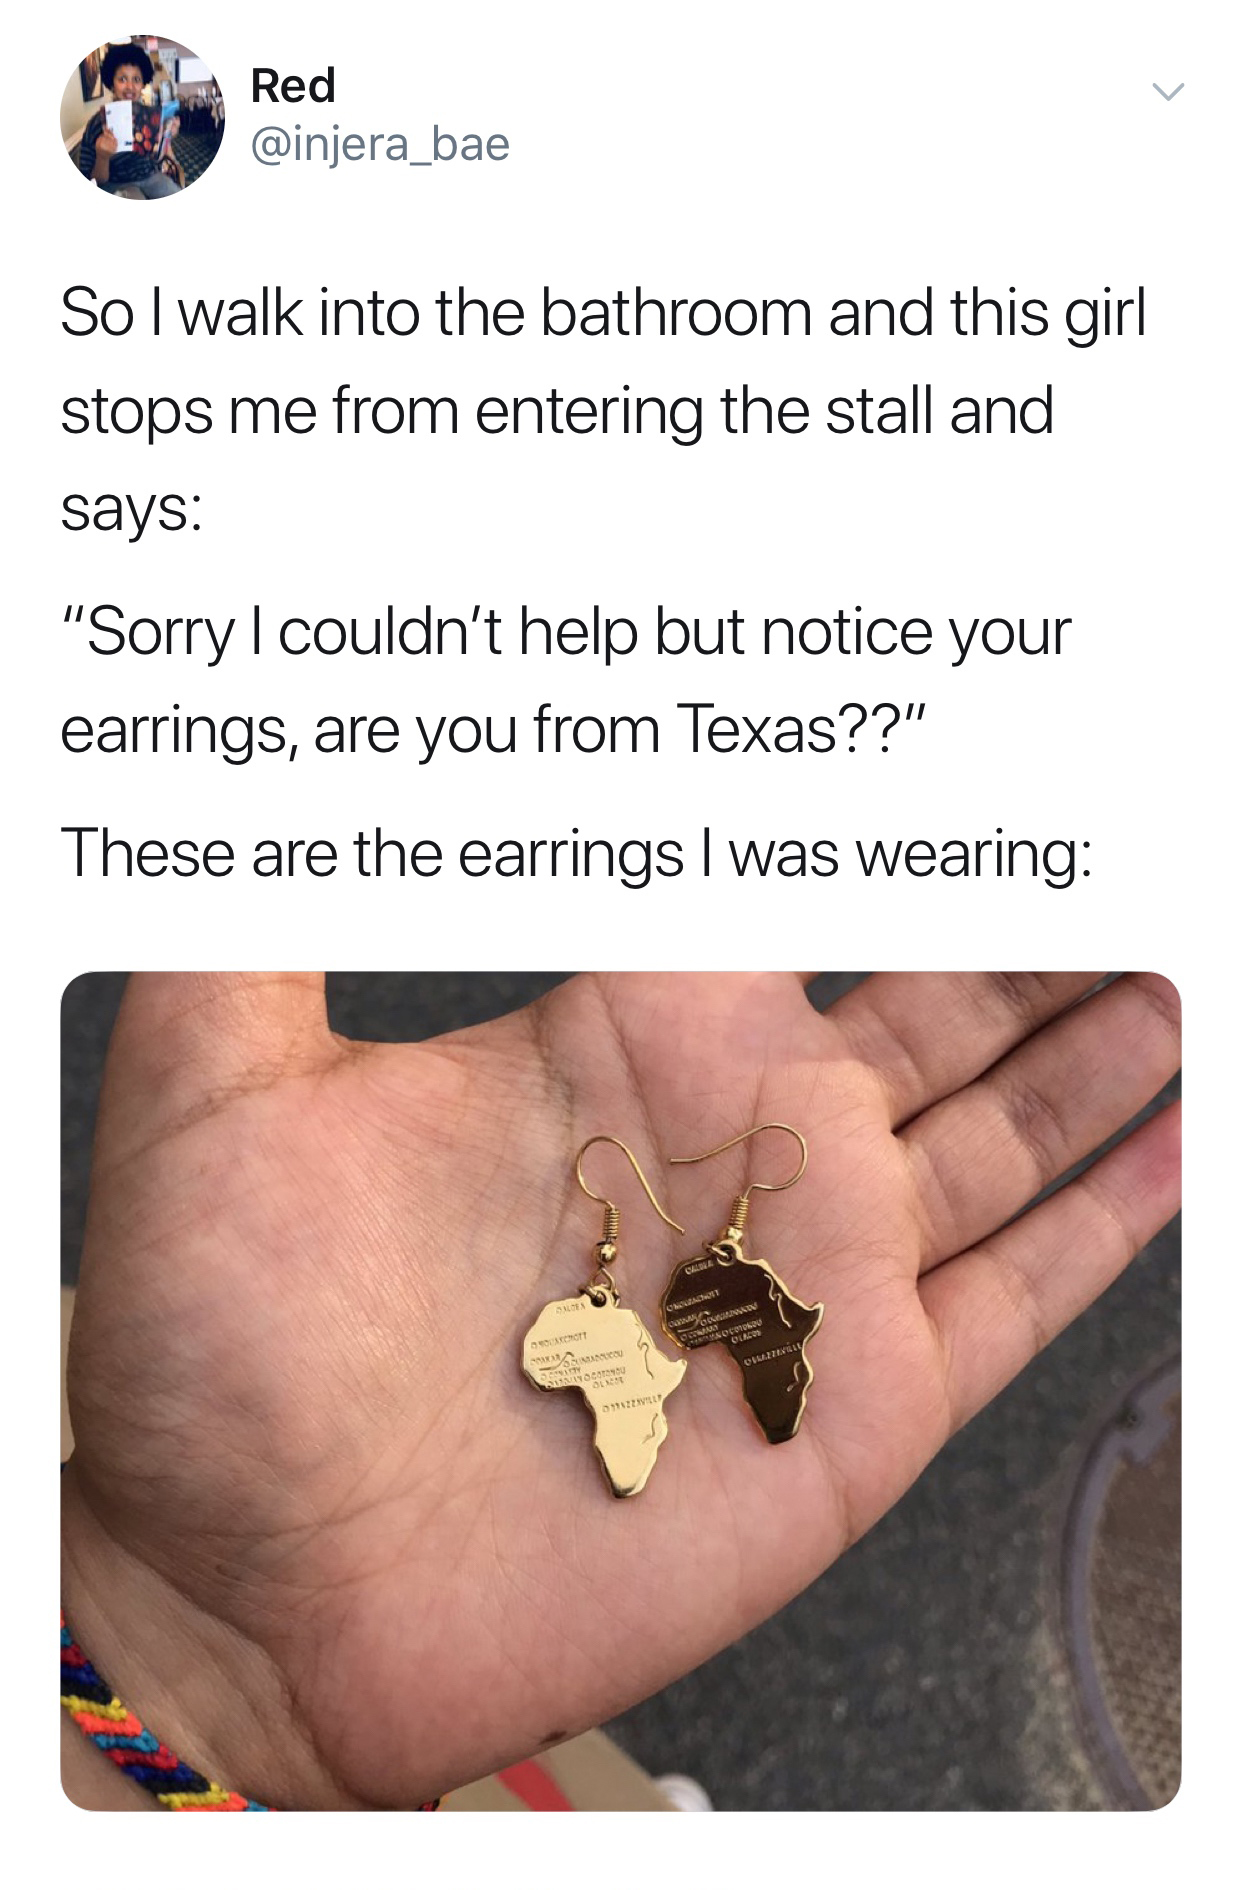 hand - Red So I walk into the bathroom and this girl stops me from entering the stall and says "Sorry I couldn't help but notice your earrings, are you from Texas??" These are the earrings I was wearing